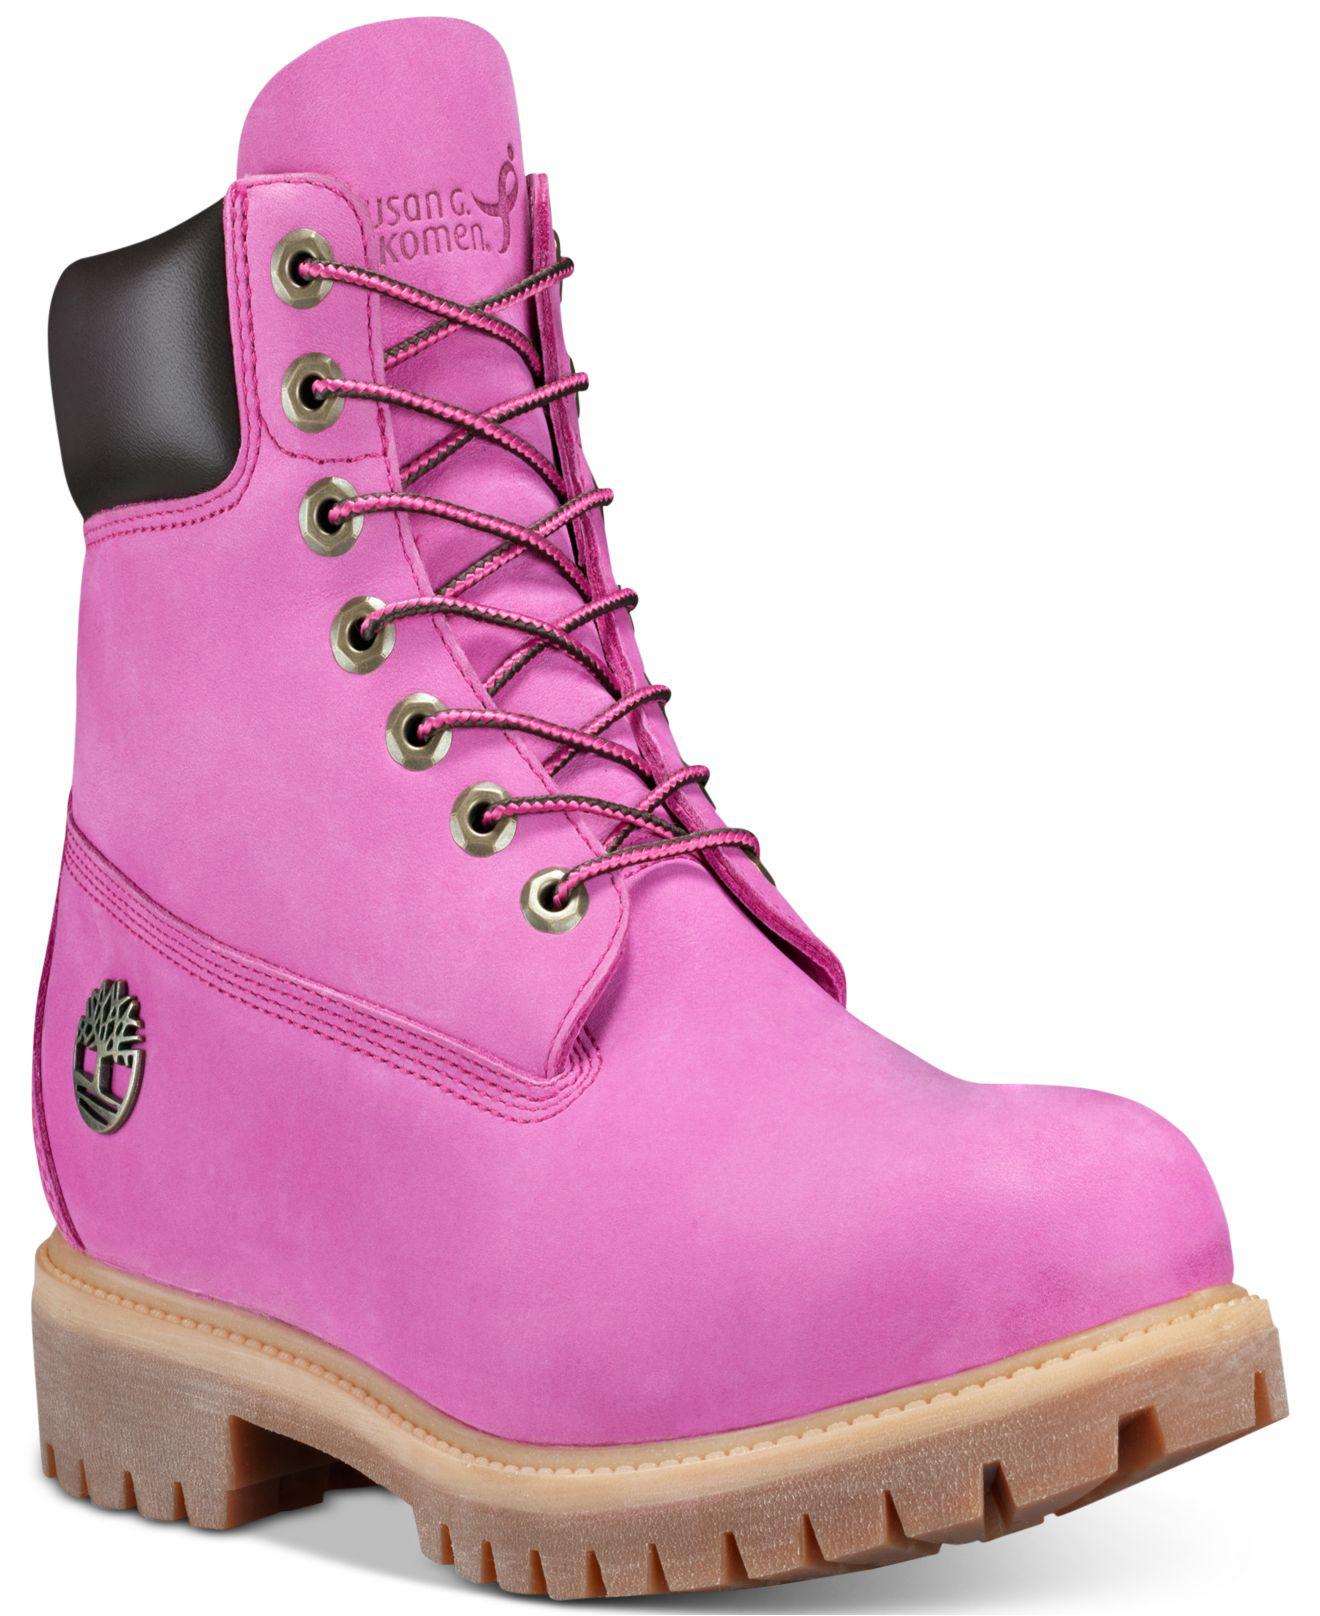 Timberland Leather Men's 6" Premium Midhigh Boots in Pink